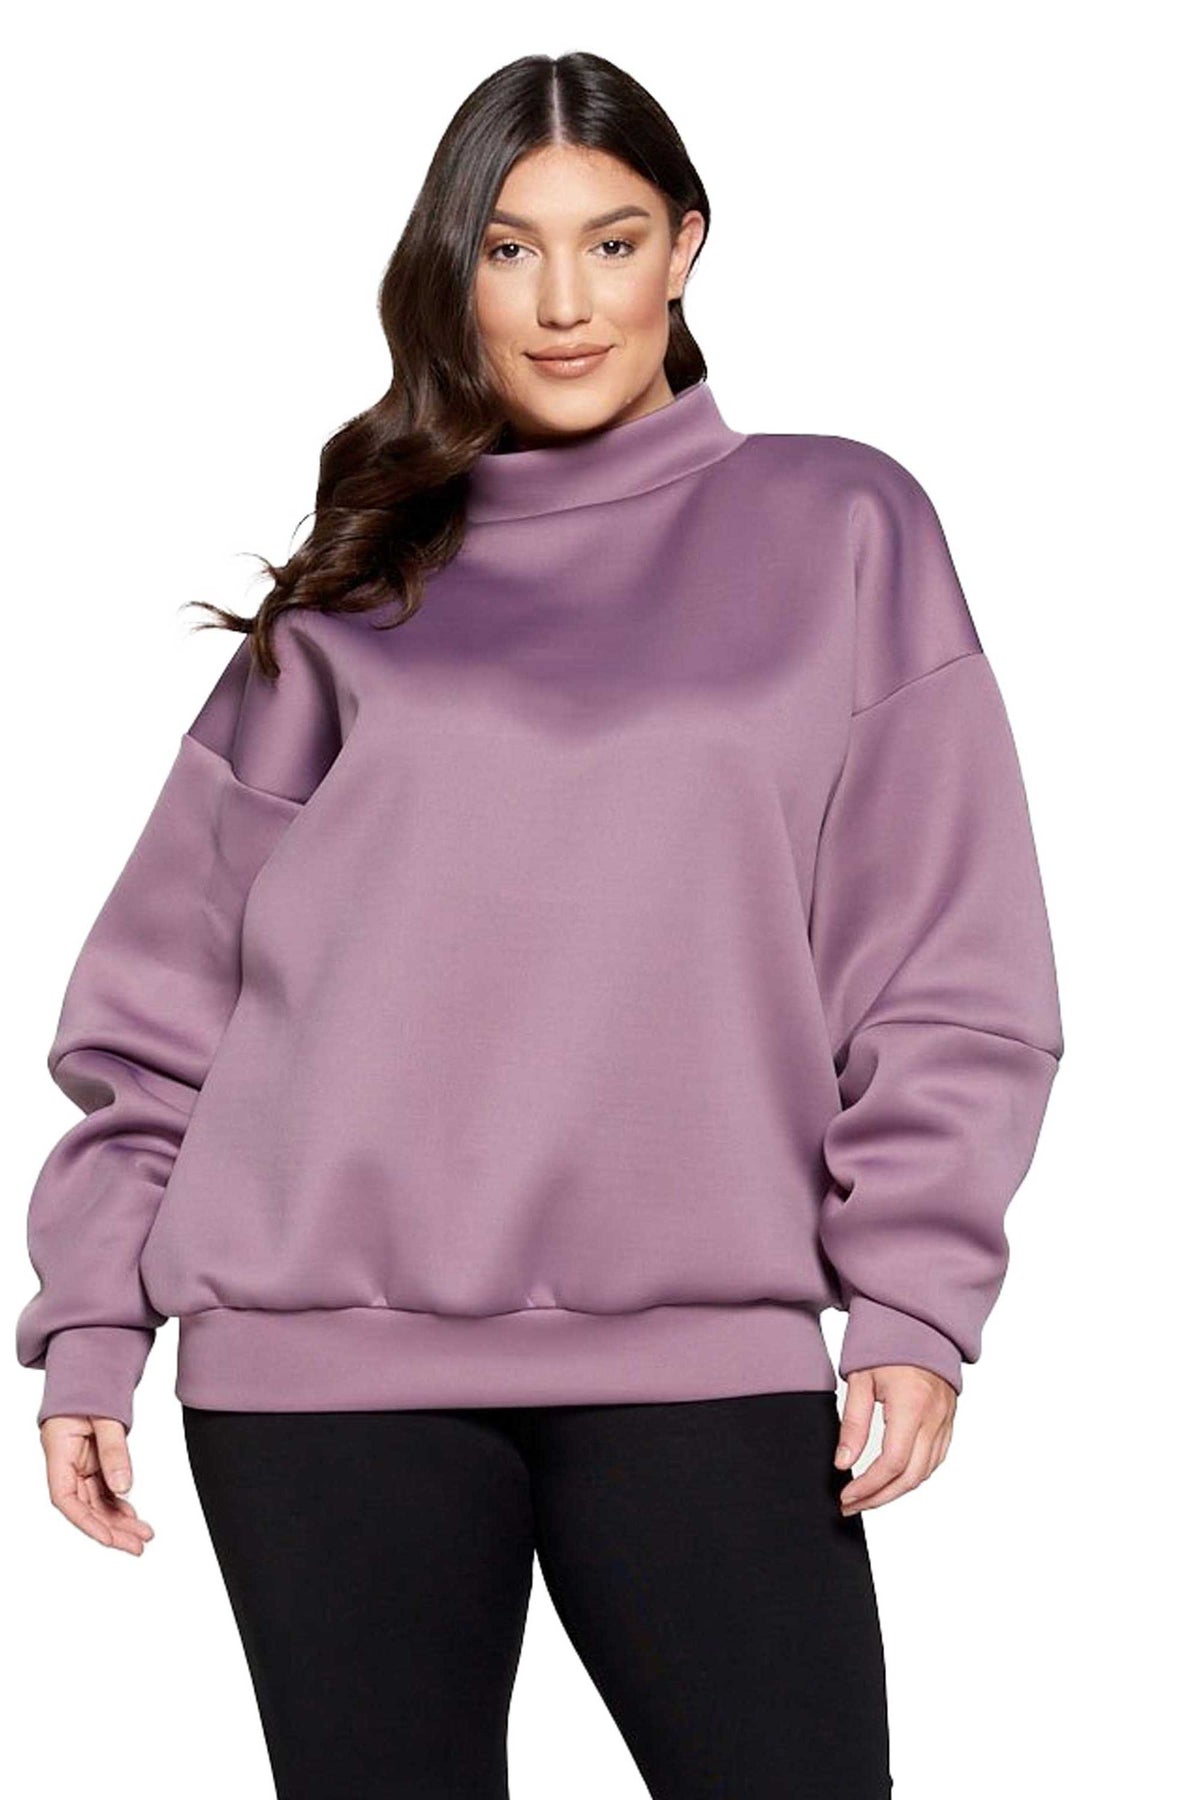 livd L I V D women's contemporary plus size boutique neoprene sweater sweatshirt with exaggerated sleeves in dusty plum lilac purple